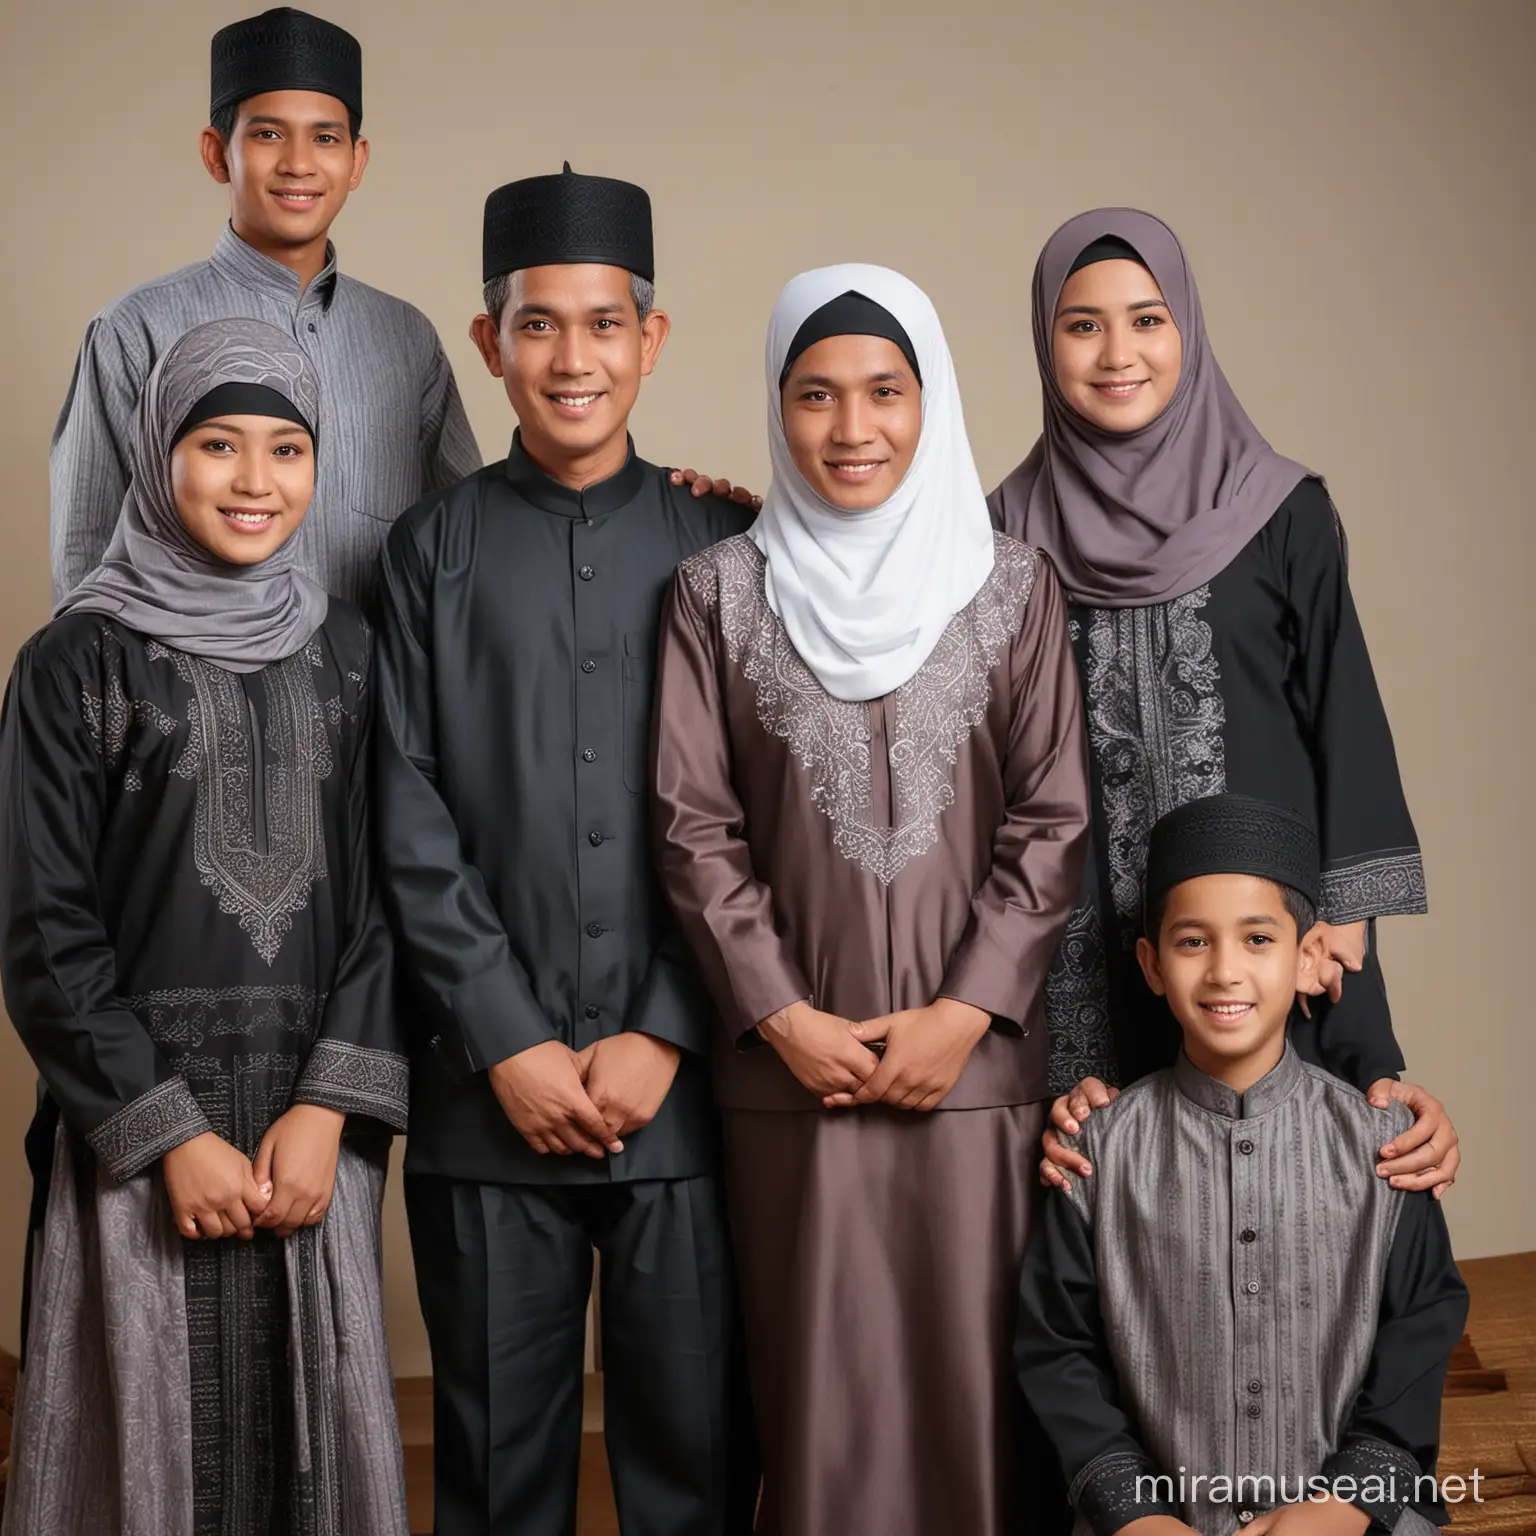 Indonesian family photo of father and mother with  Boys aged 15 years, girls aged 14 years and boys aged 9 years with Muslim clothing